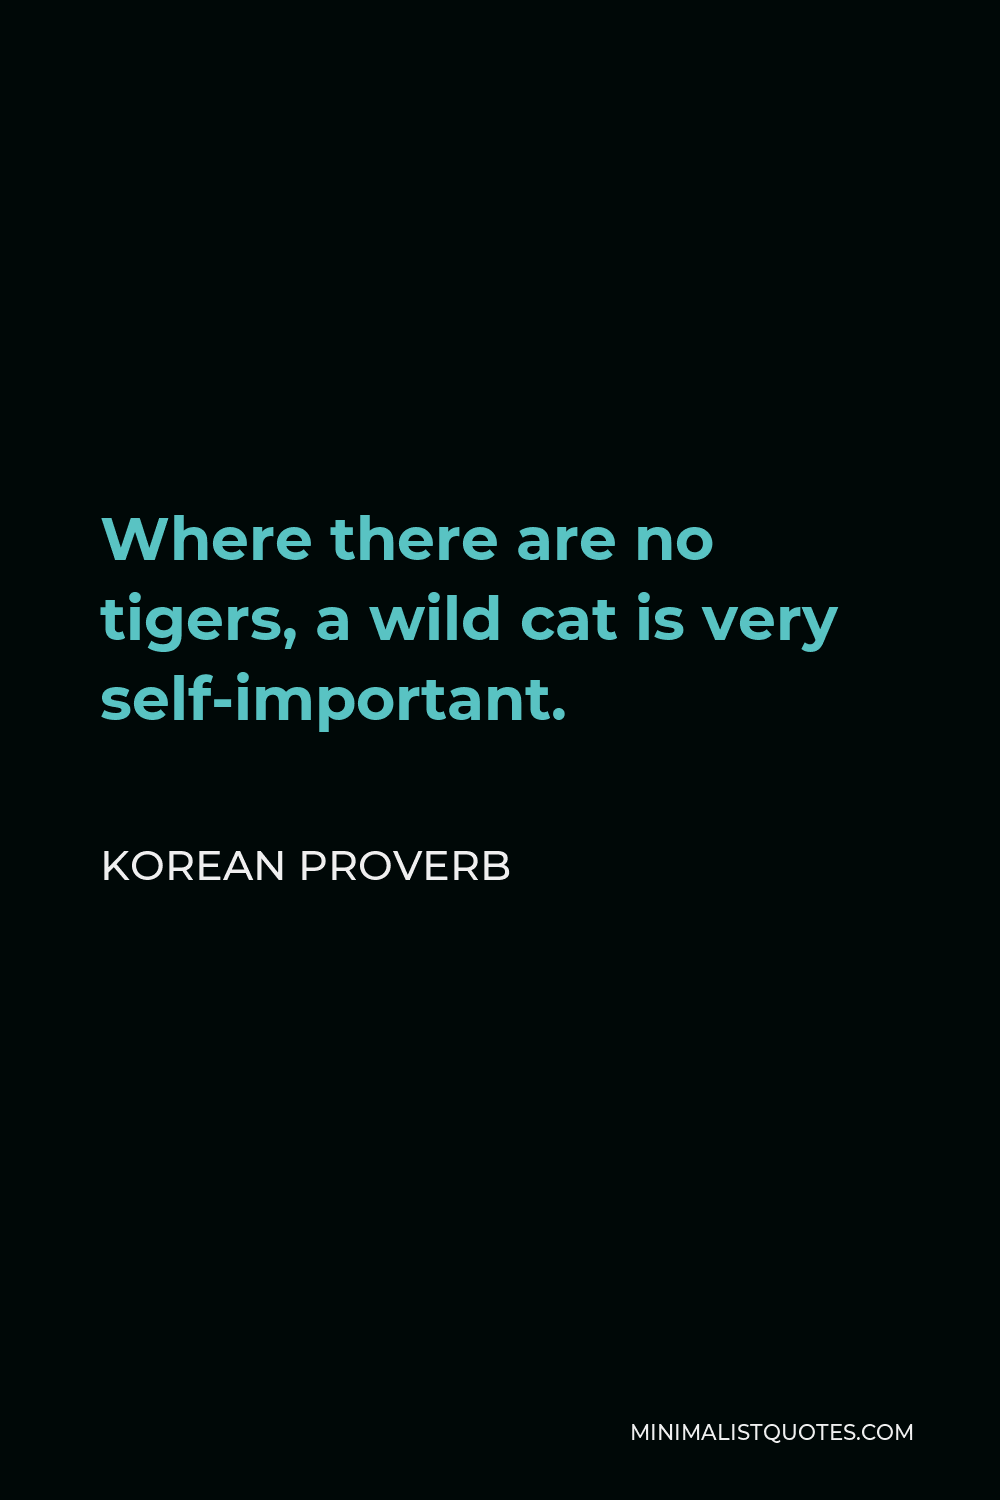 Korean Proverb Quote - Where there are no tigers, a wild cat is very self-important.